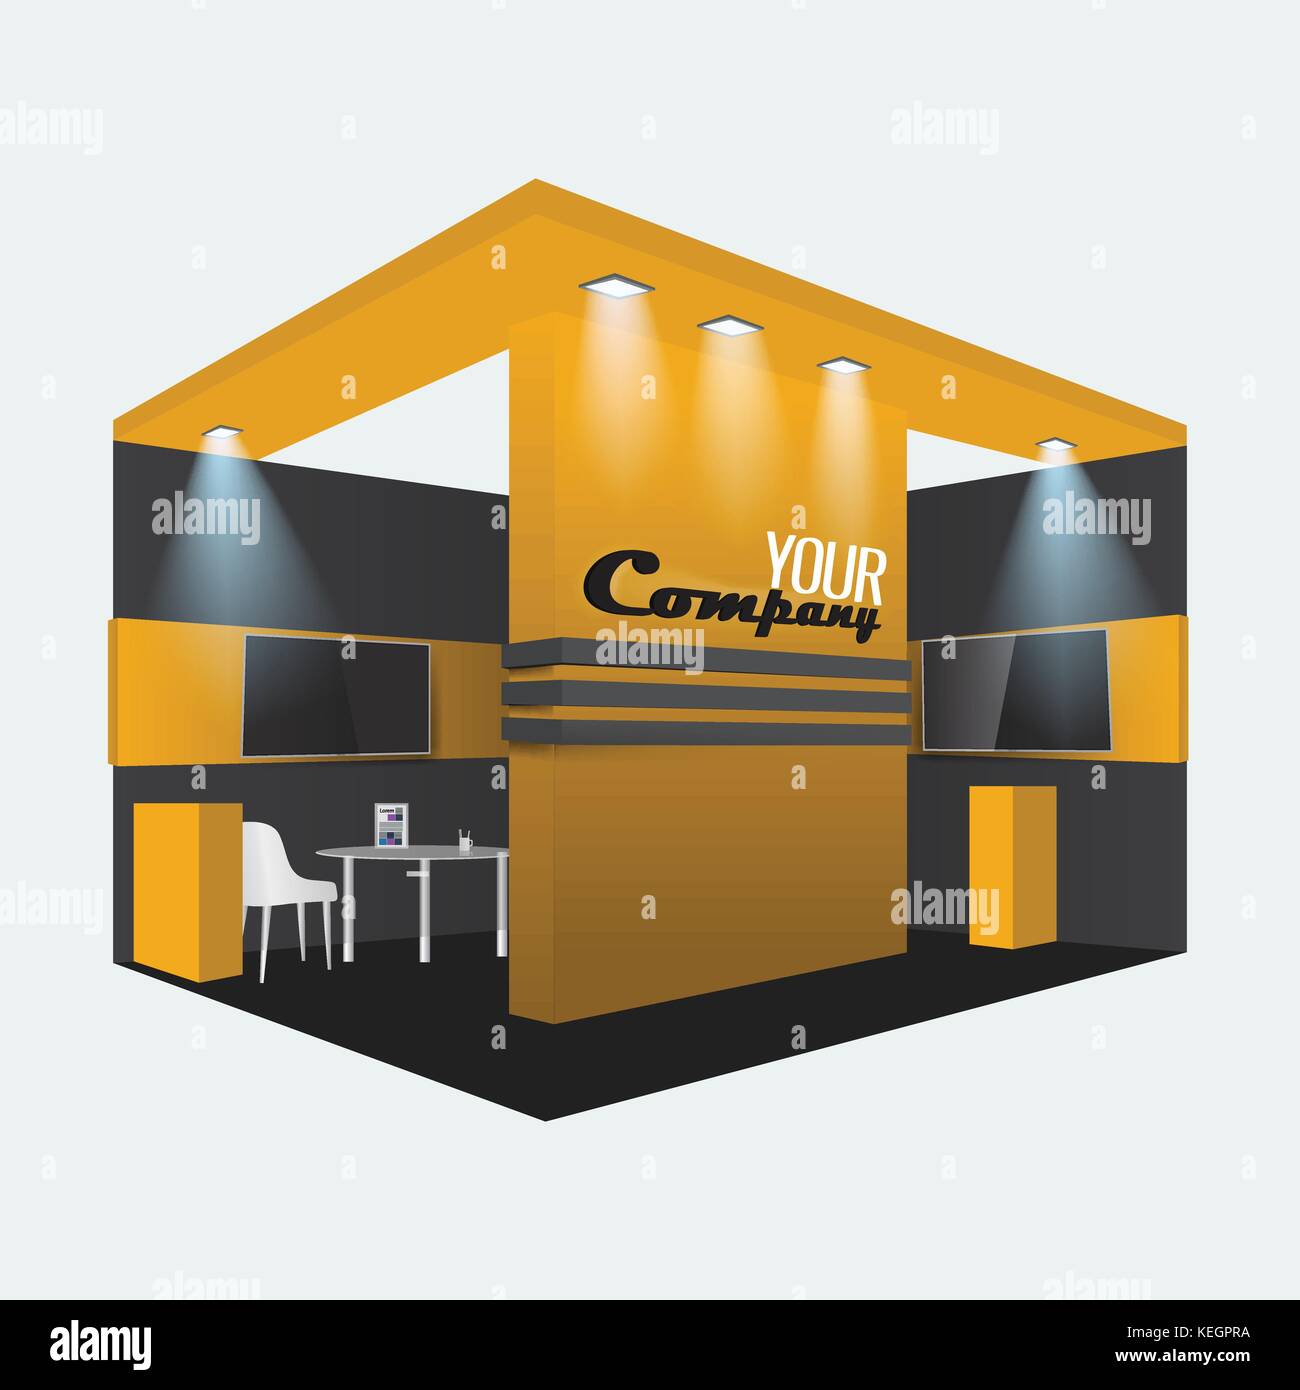 Download Exhibition Stand Display Trade Booth Mockup Design Orange And Black Illustrated Vector Stock Vector Image Art Alamy